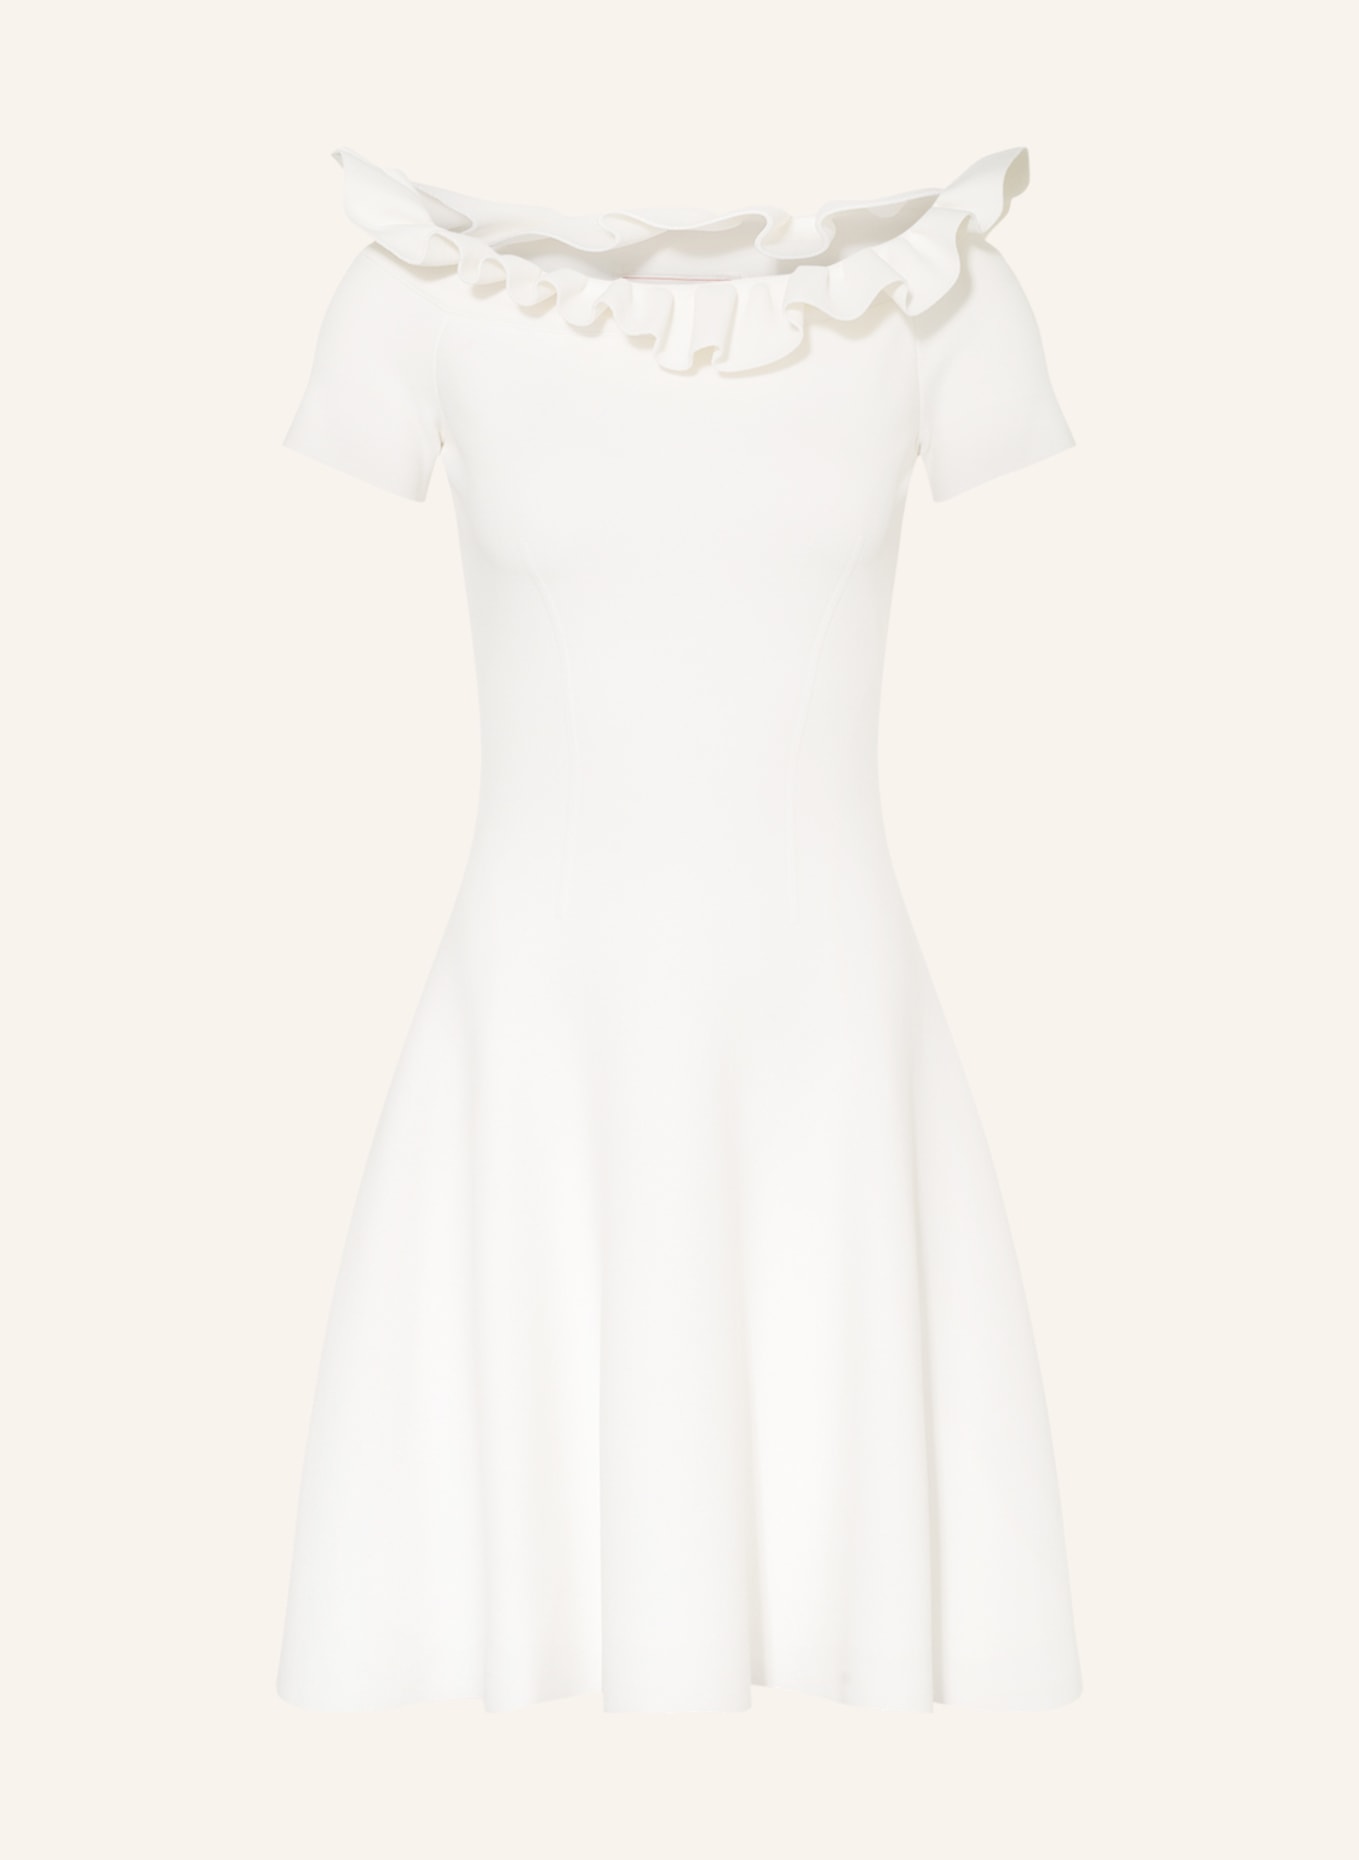 Alexander McQUEEN Dress with frill trim, Color: CREAM (Image 1)